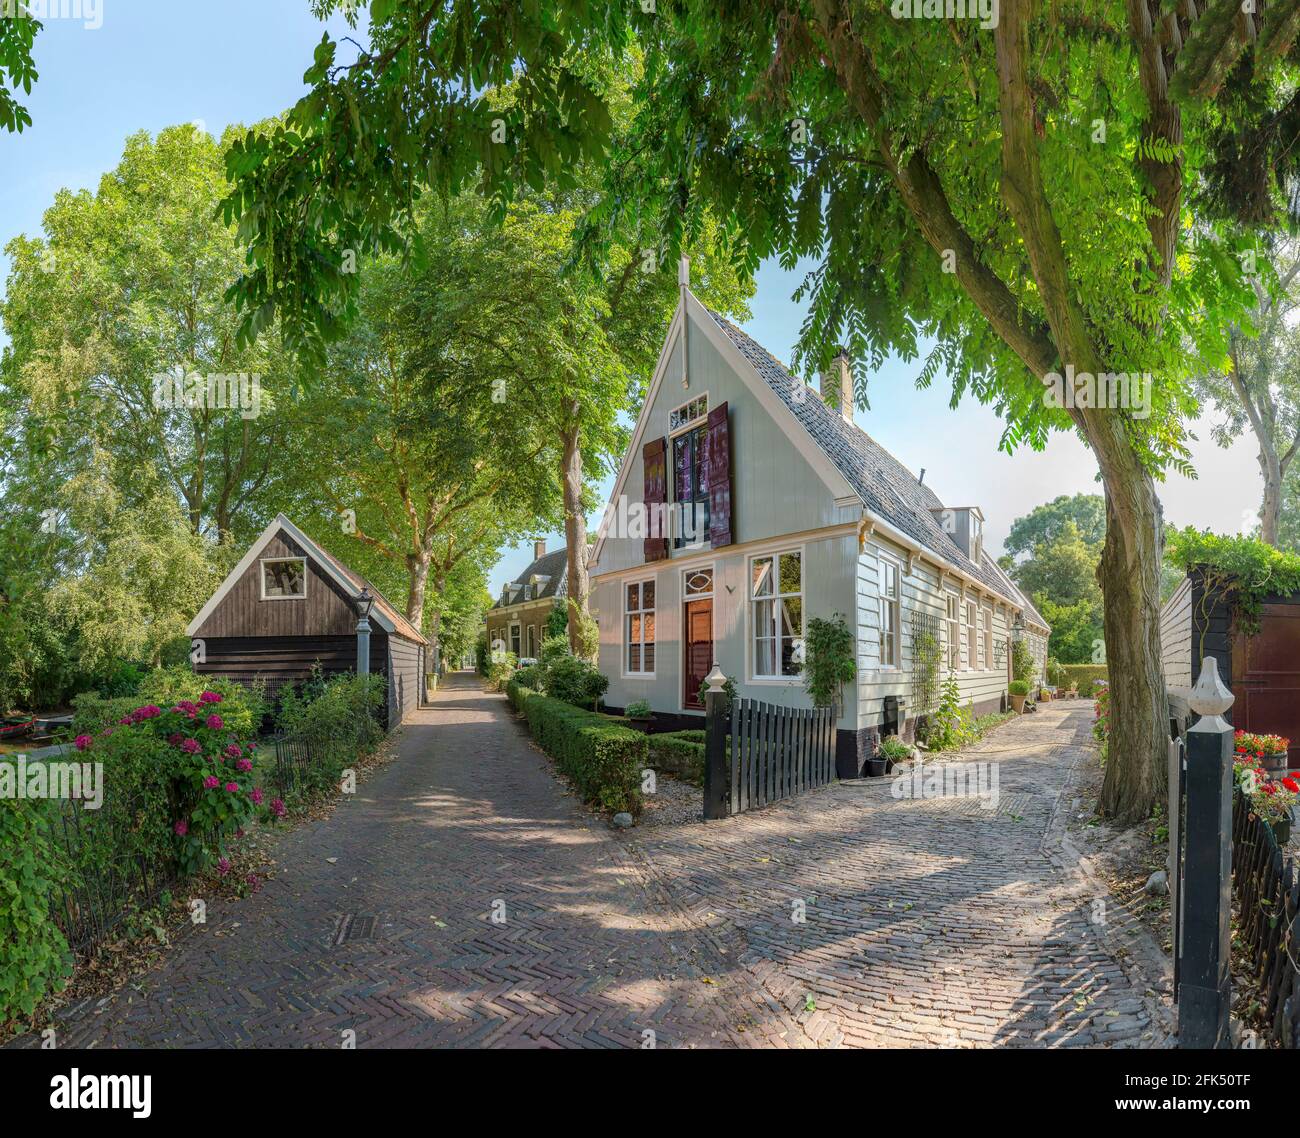 Wooden house *** Local Caption ***  Broek in Waterland,   Noord-Holland, Netherlands, city, village, forest, wood, trees, summer, Stock Photo